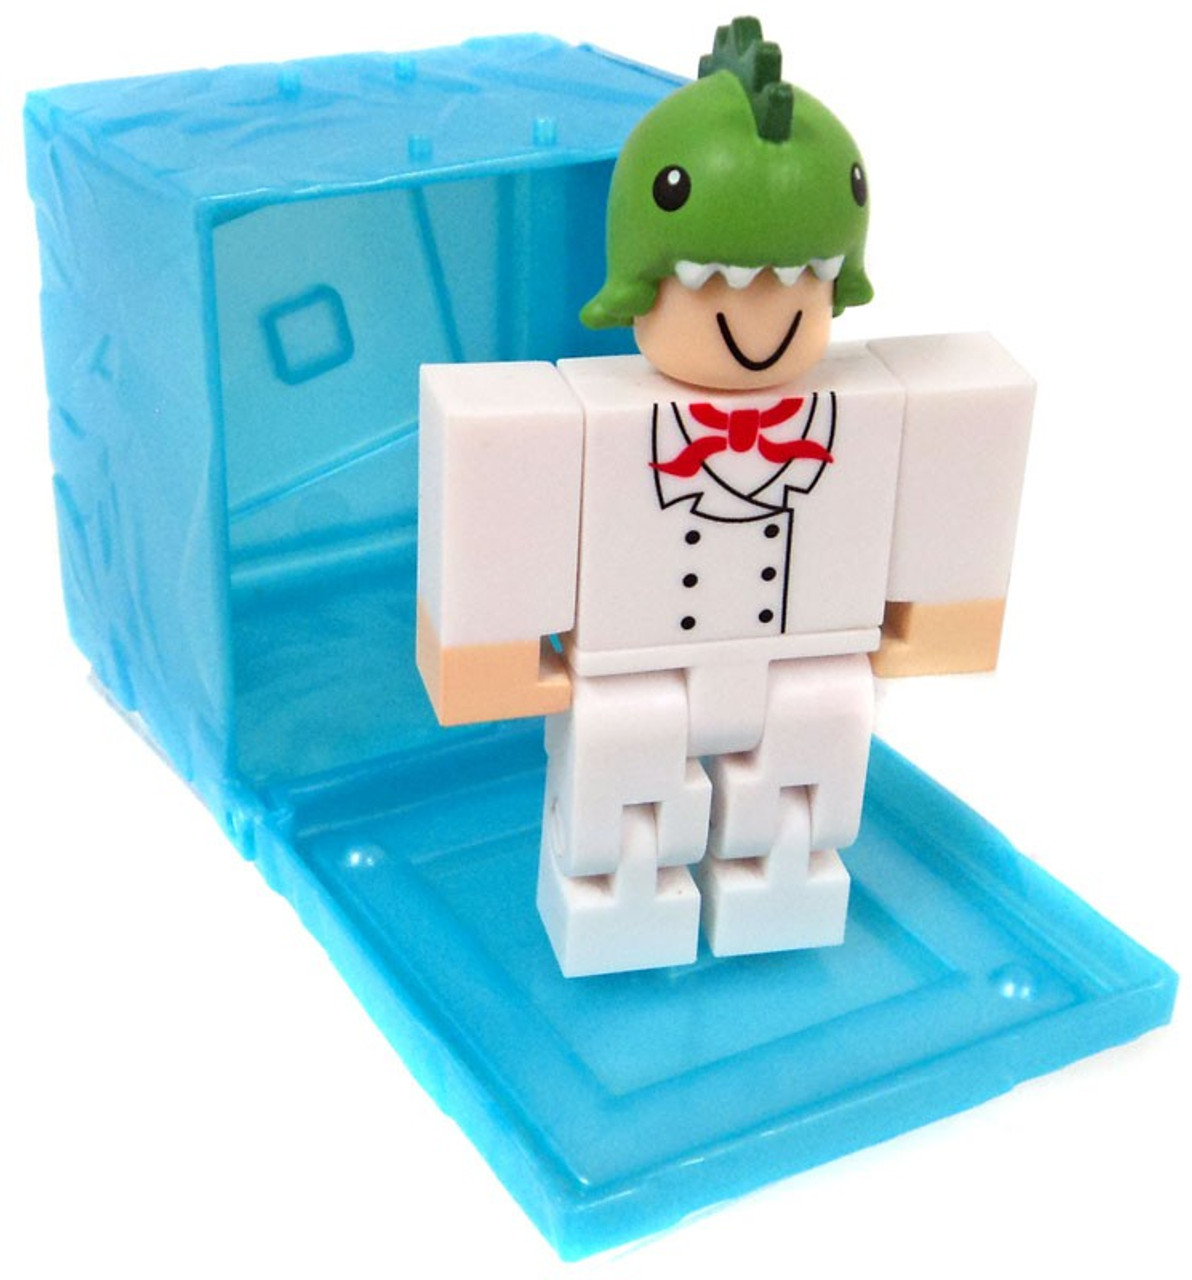 Roblox Red Series 3 Theme Park Tycoon Dino Vender 3 Mini Figure Blue Cube With Online Code Loose Jazwares Toywiz - roblox series 6 mining simulator miner mike 3 mini figure with orange cube and online code loose jazwares toywiz